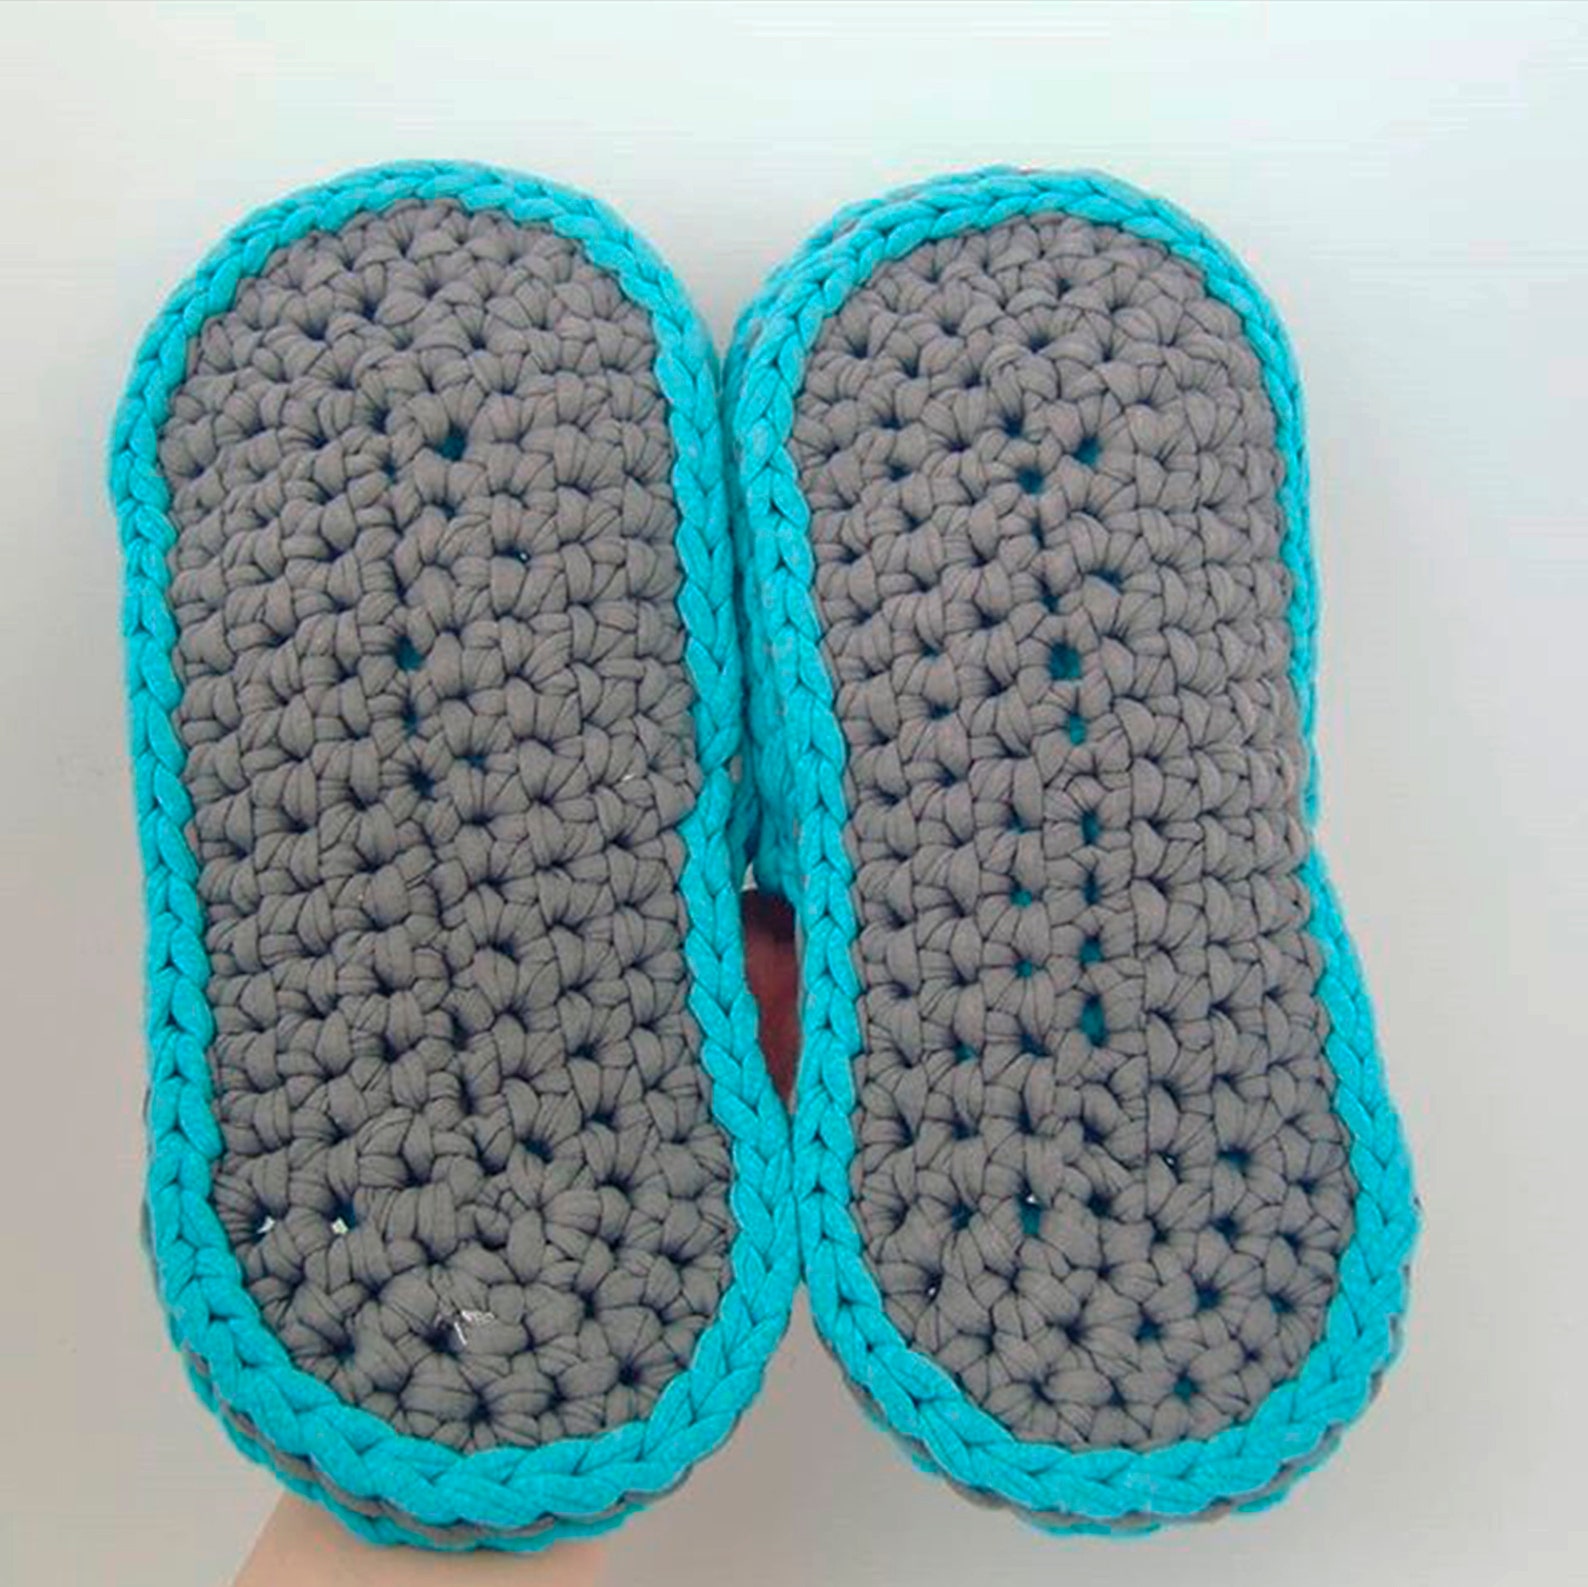 slippers / ballet shoes / knitted shoes / home ballet shoes/shoes for homе